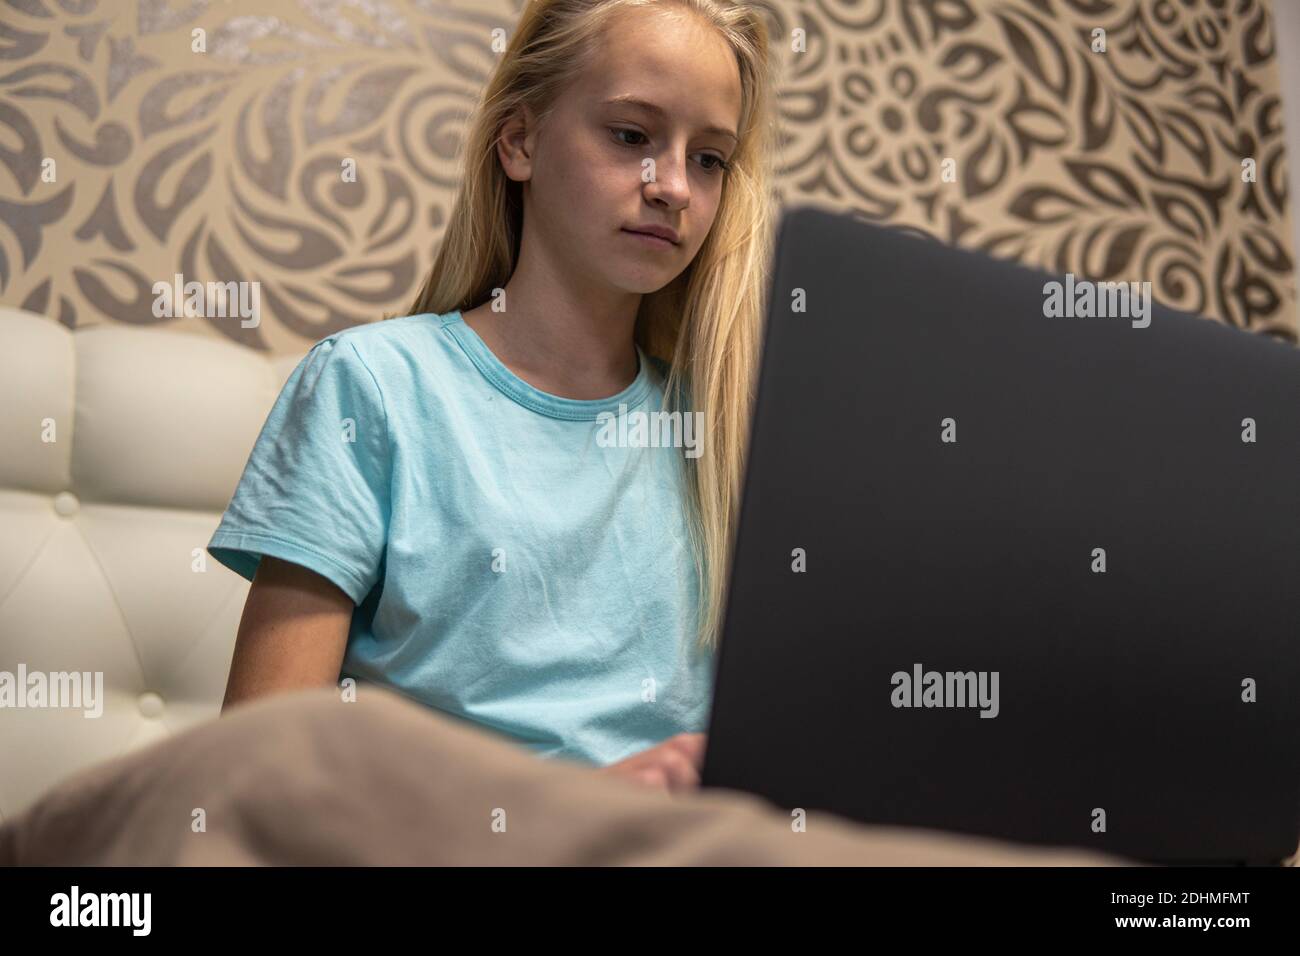 Teenage girl with blond hair working on laptop in bed. high quality Stock Photo